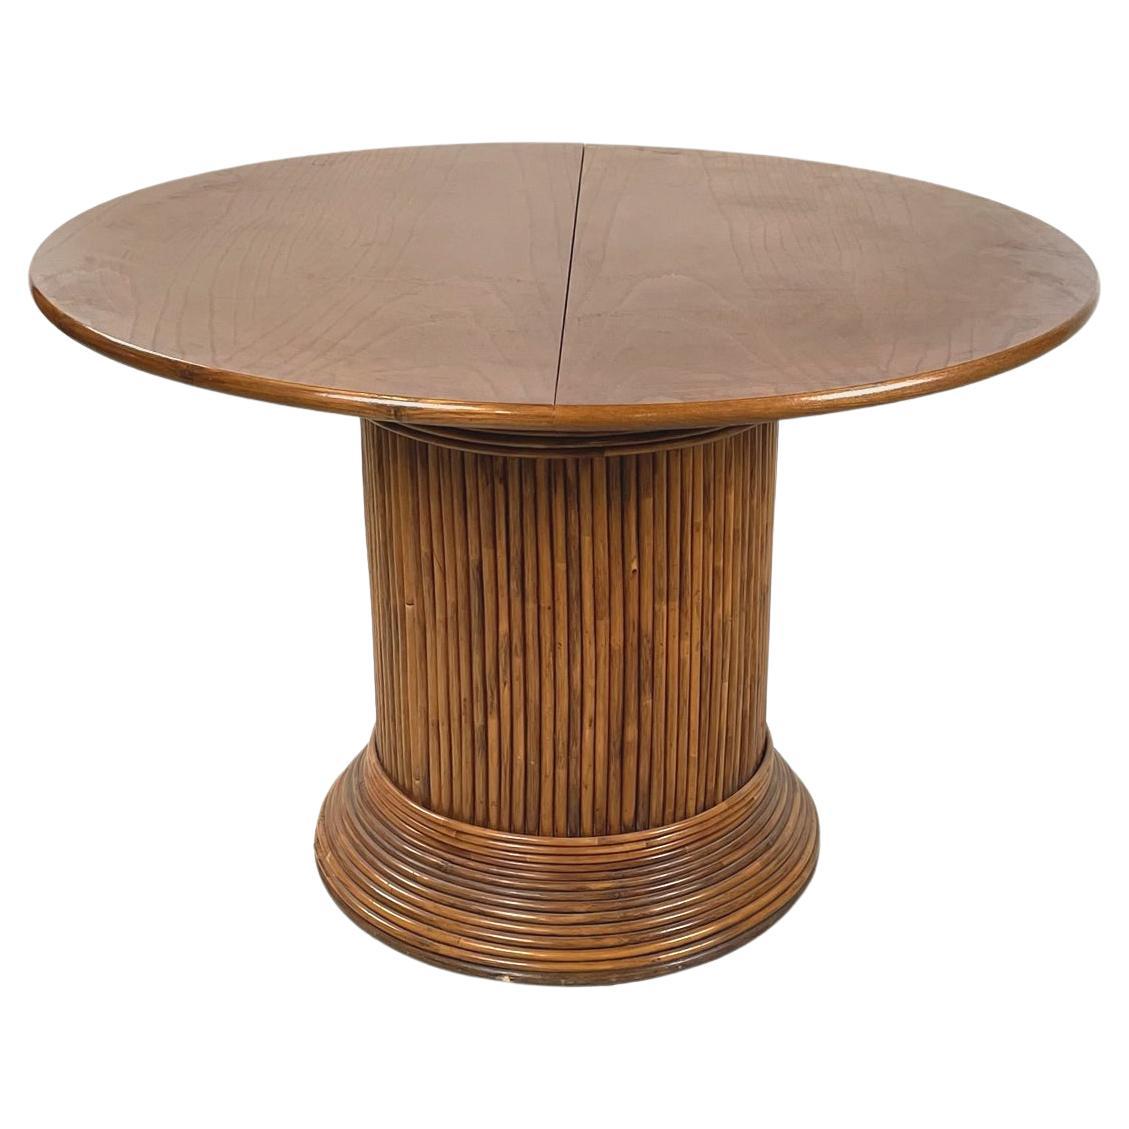 Italian mid-century Round or oval wooden dining table with extensions, 1960s